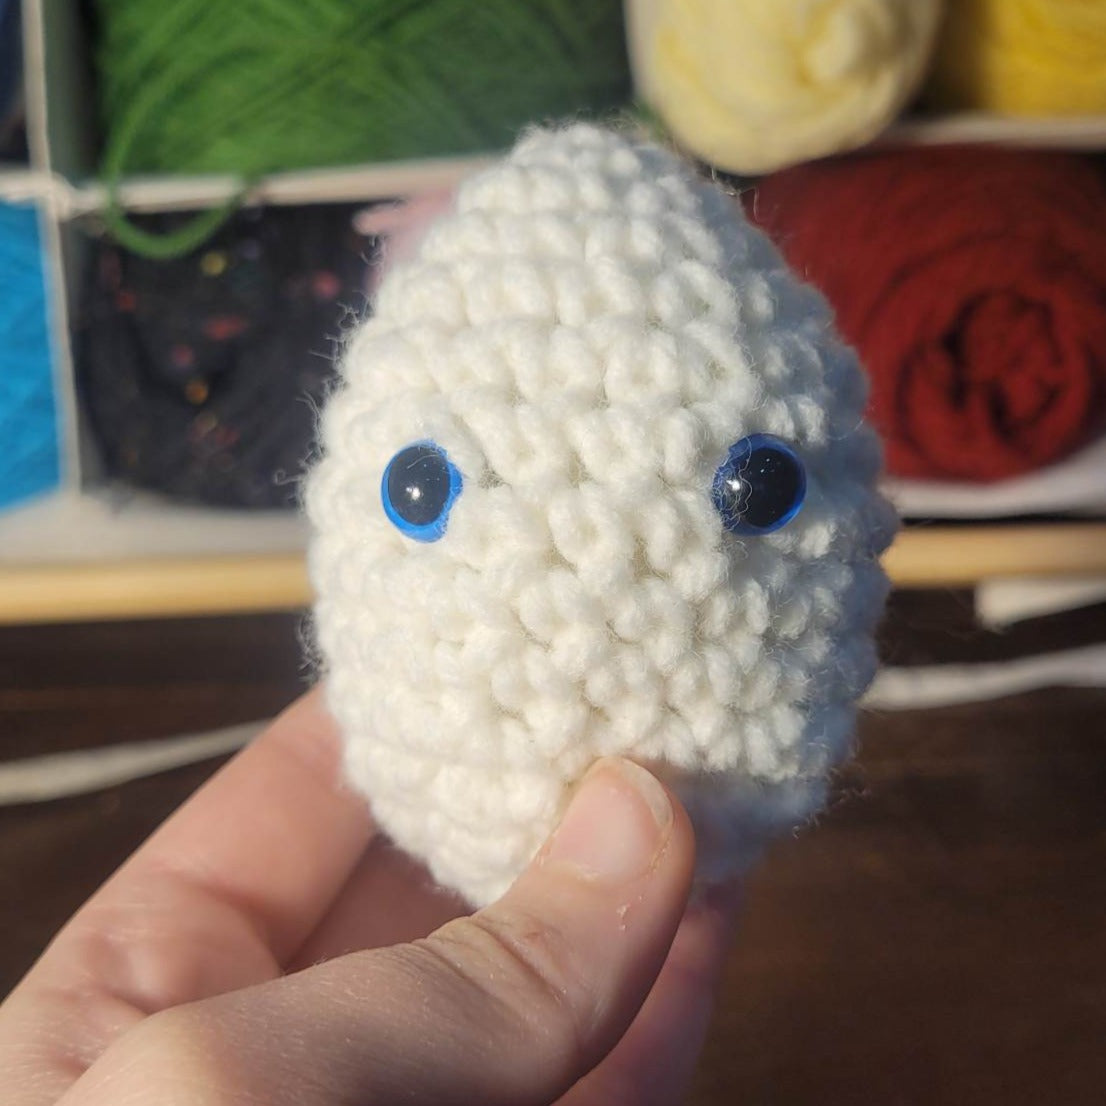 Emotional Support Eggs - Hand Crocheted – PenflowerMakes